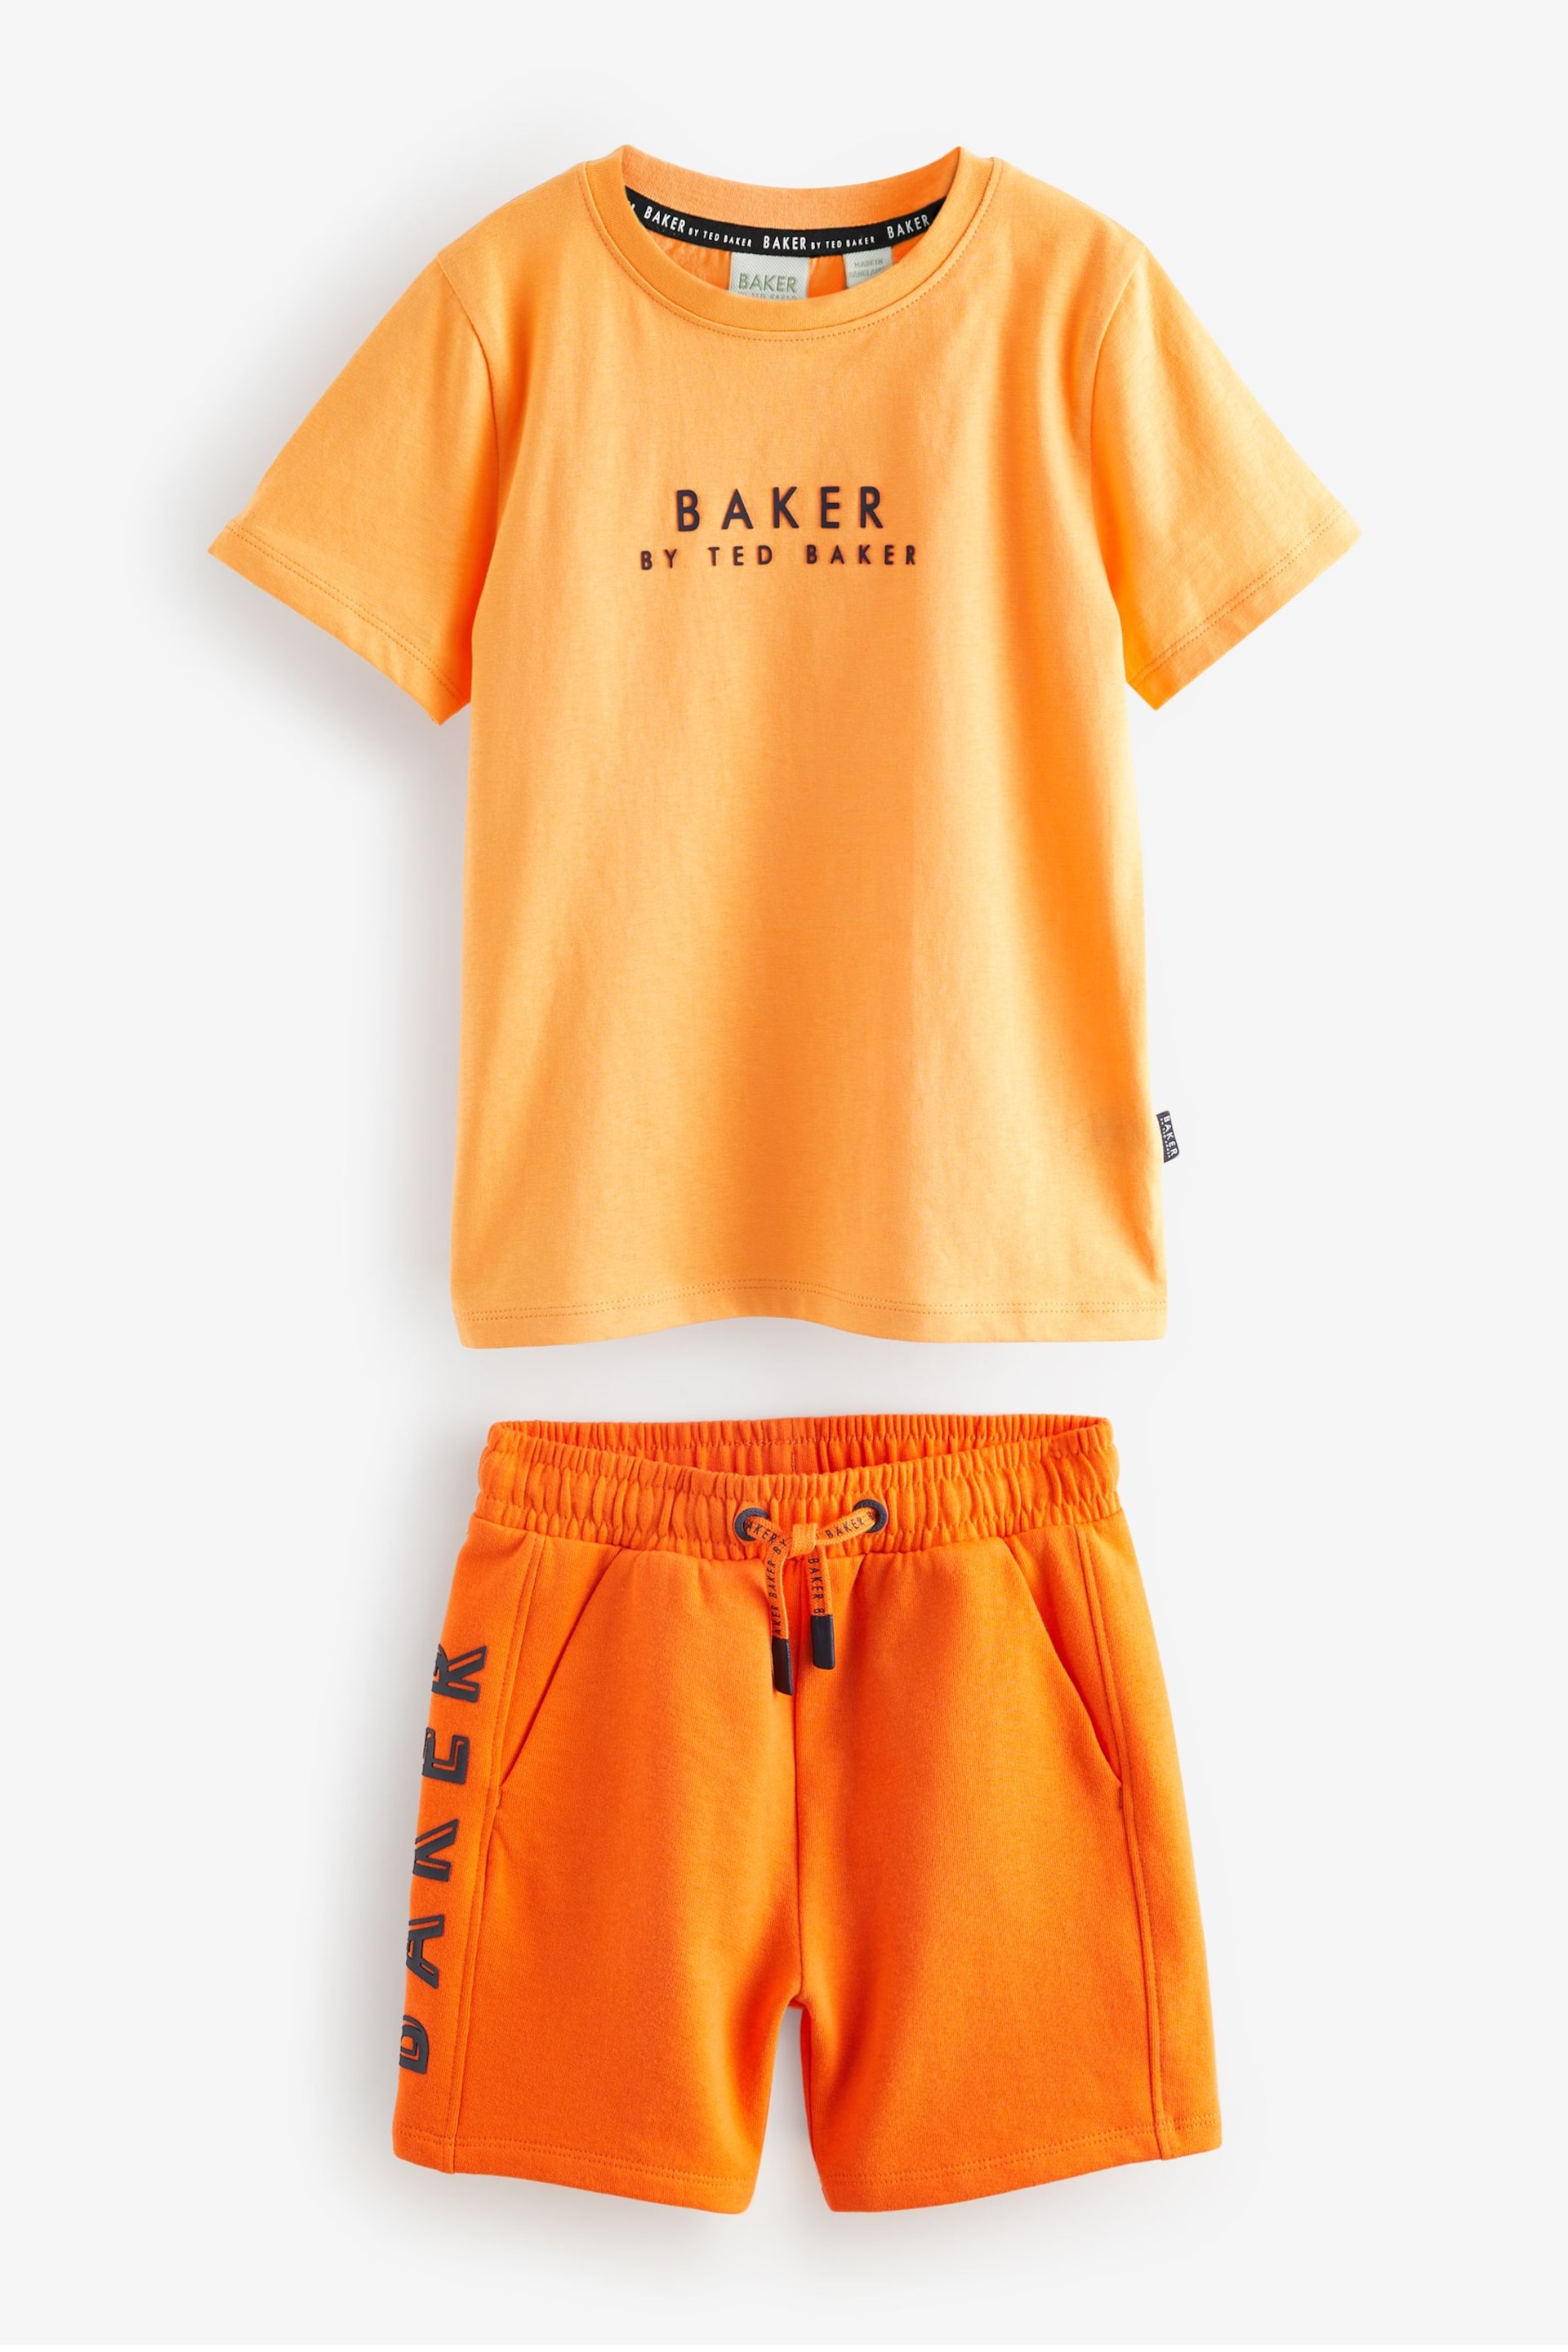 Baker by Ted Baker T-Shirt and Shorts Set - Image 9 of 13